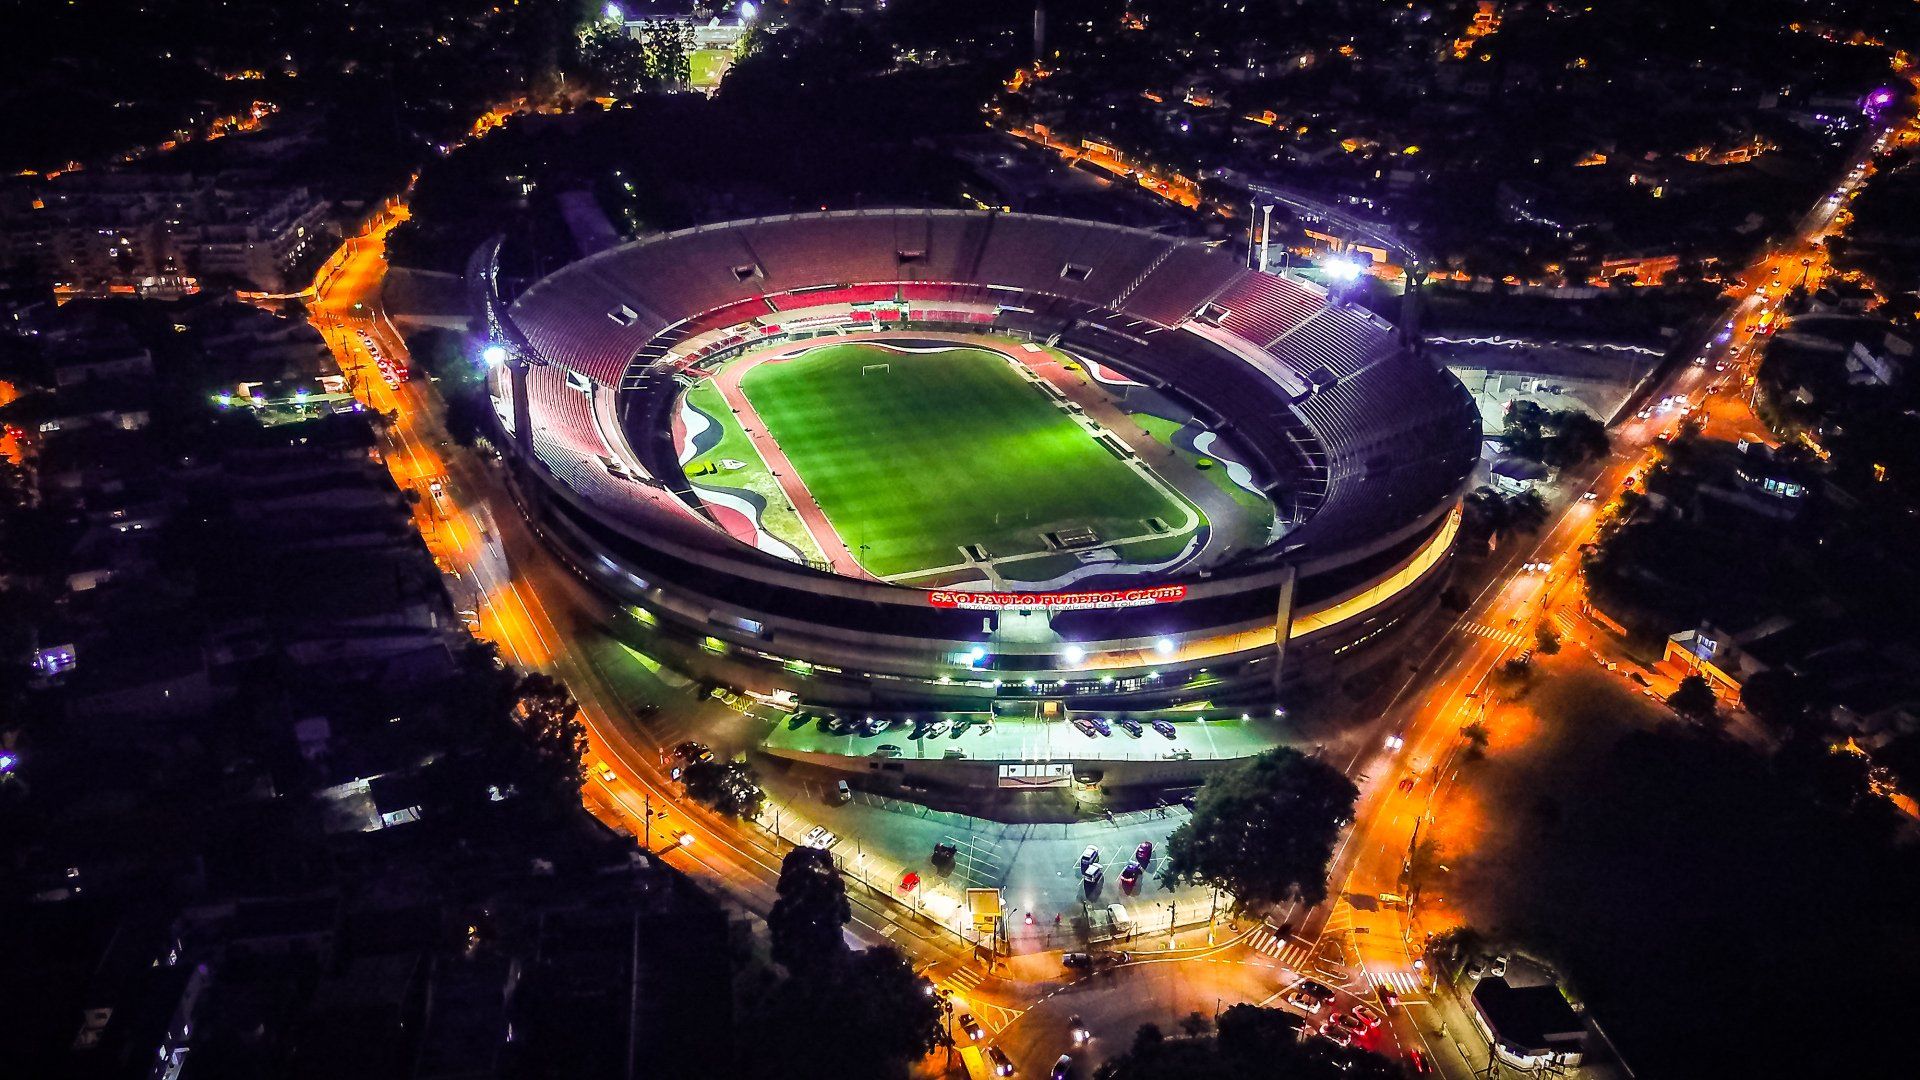 An aerial view of a soccer stadium at night.